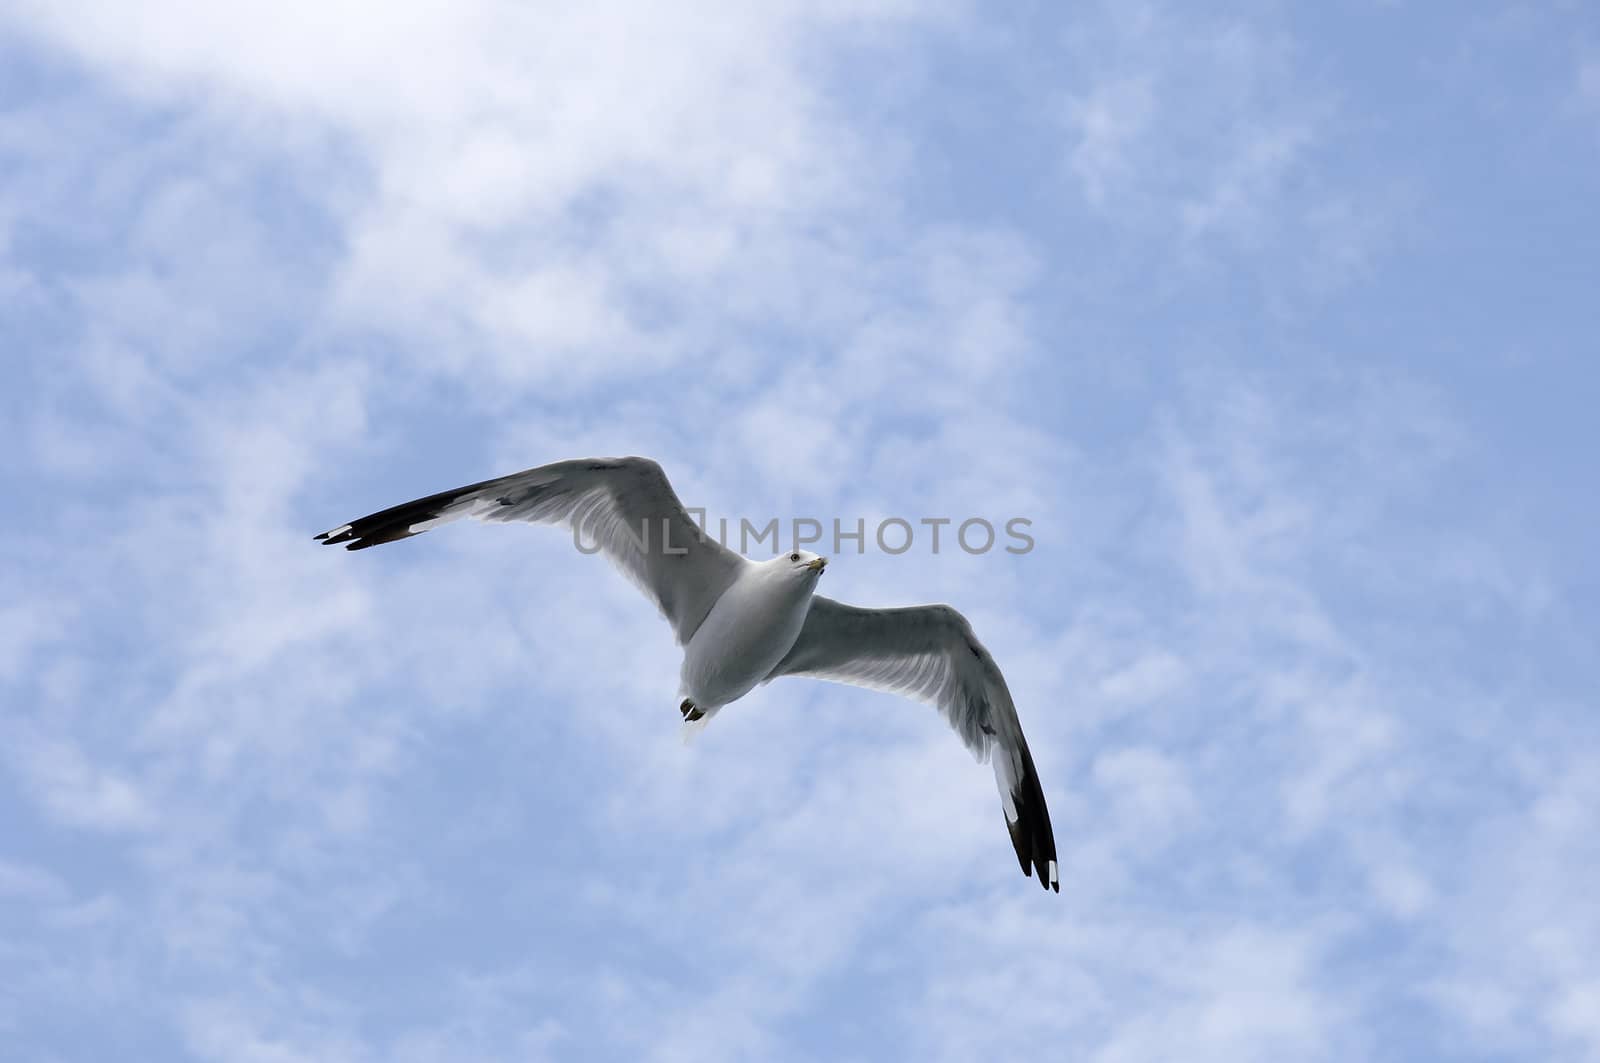 seagull flying in a cloudy sky